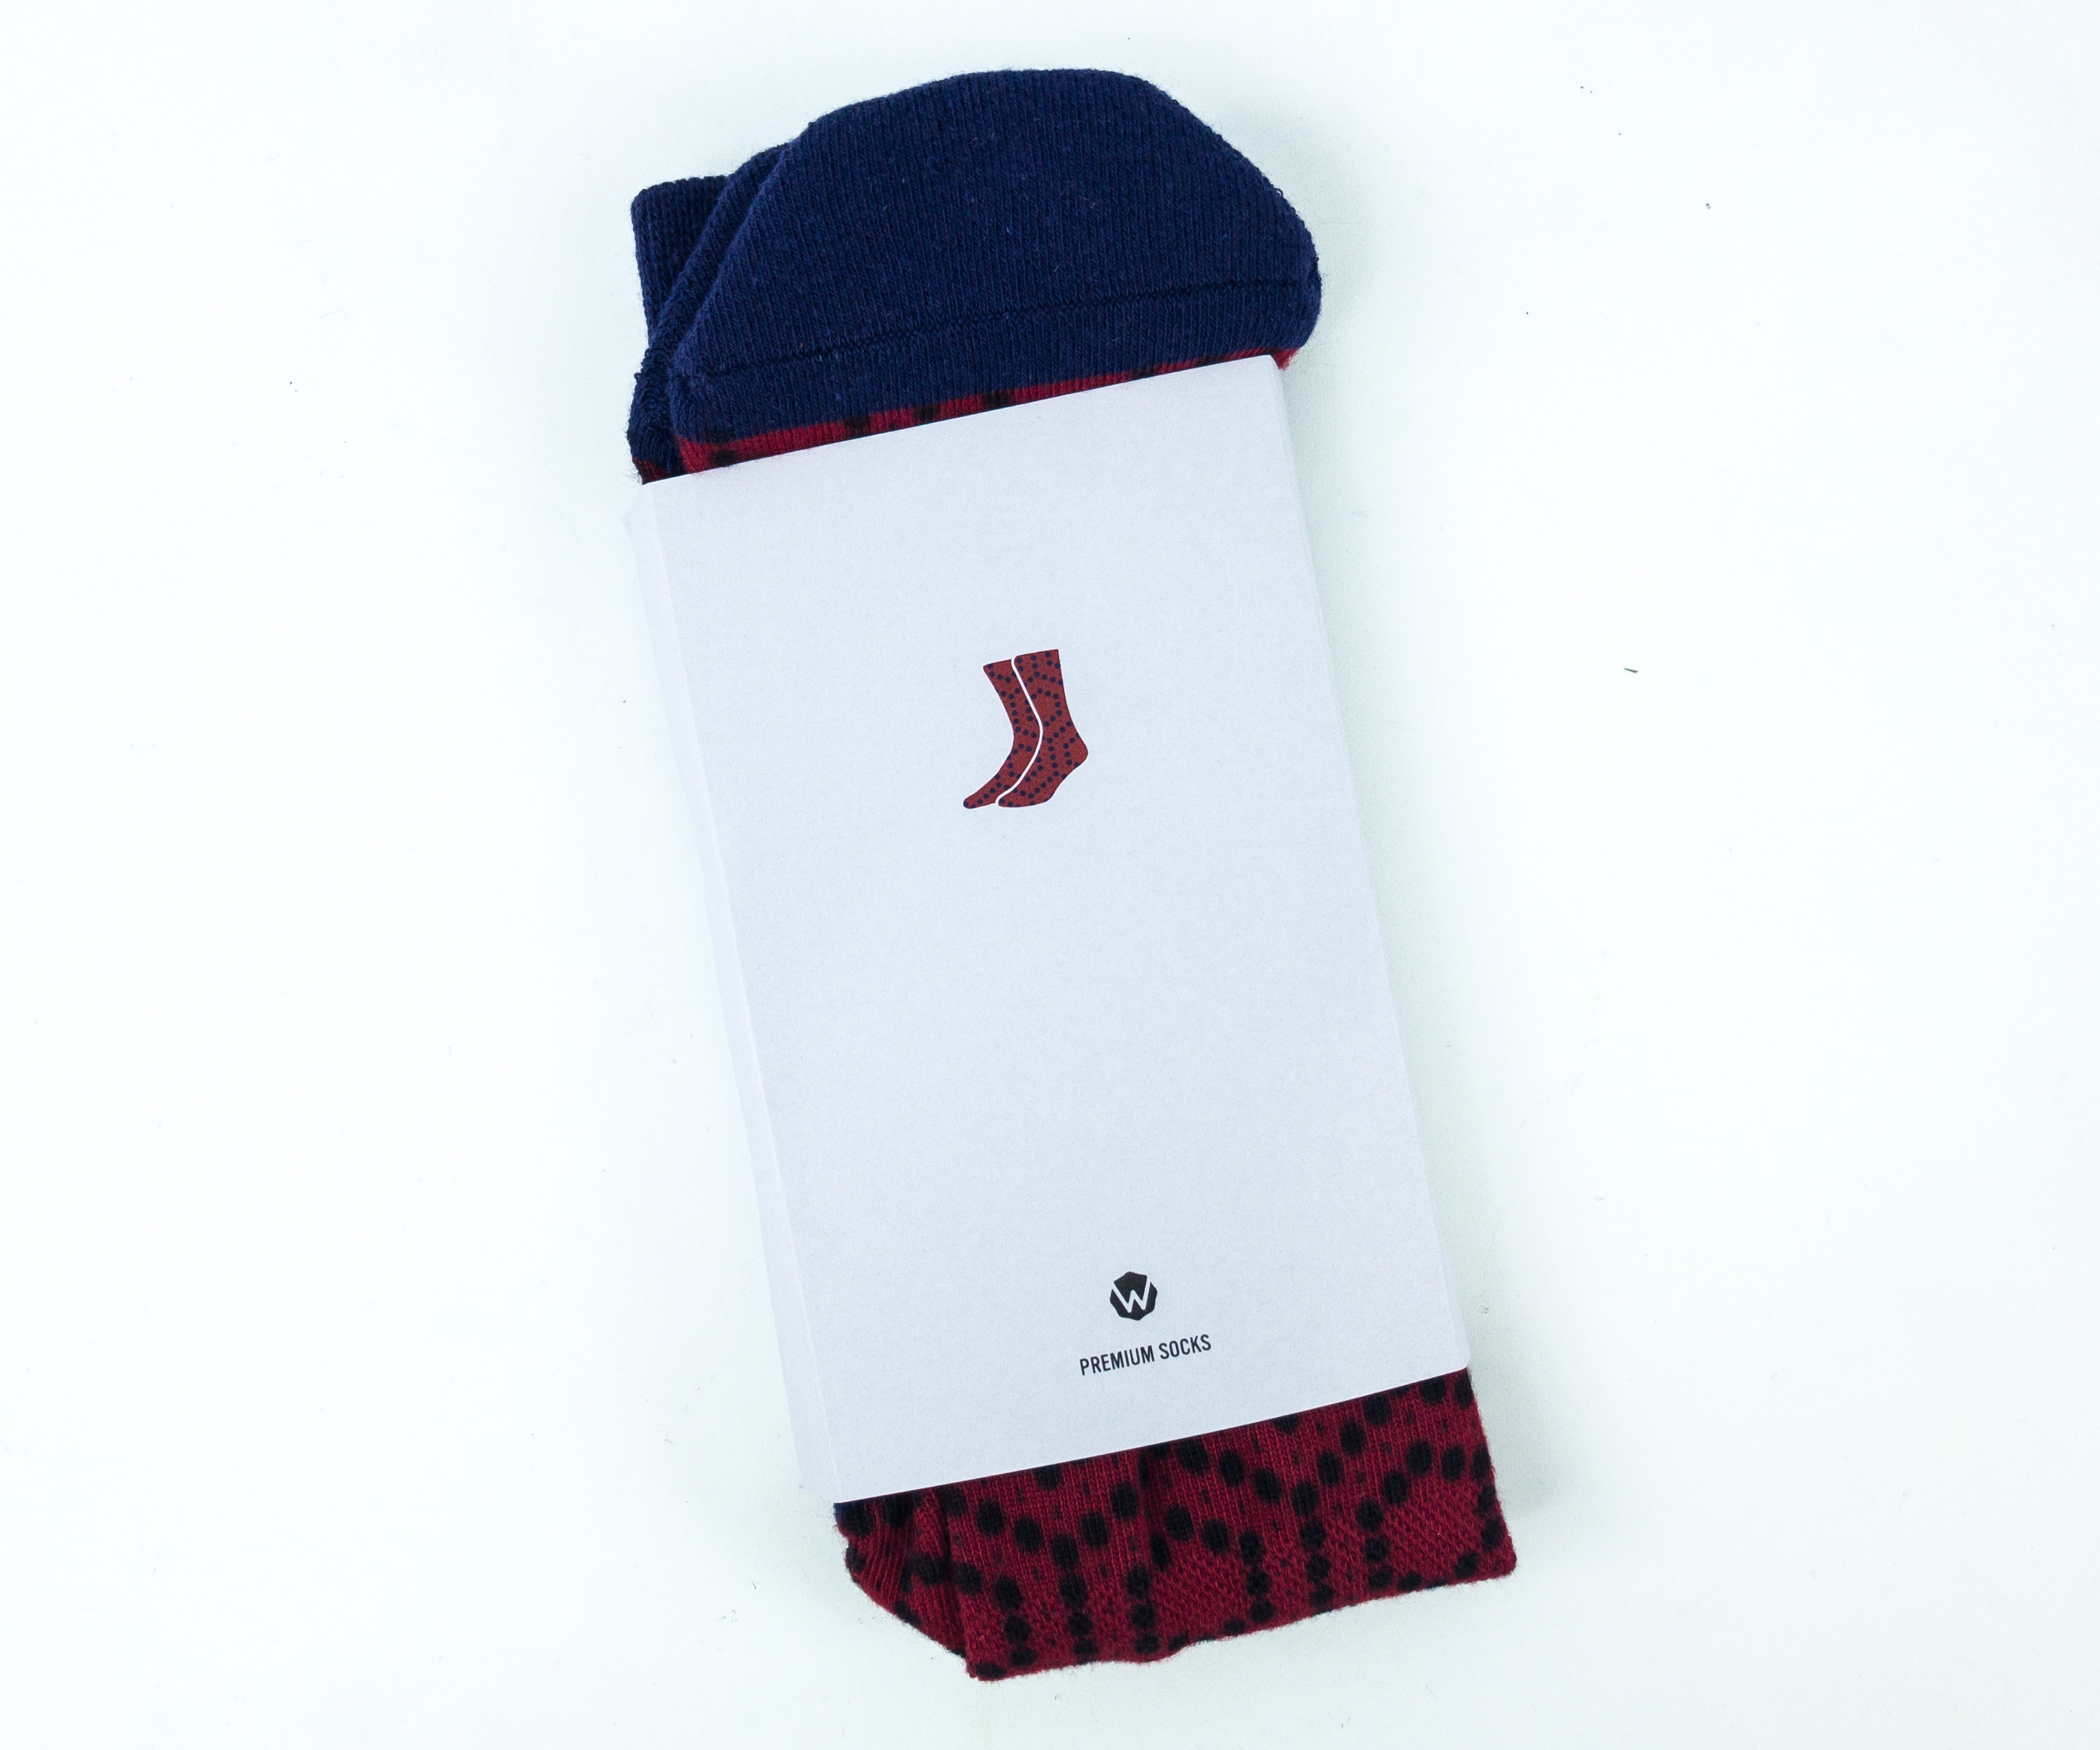 Wohven Socks Subscription August 2019 Review + Coupon! - Hello Subscription